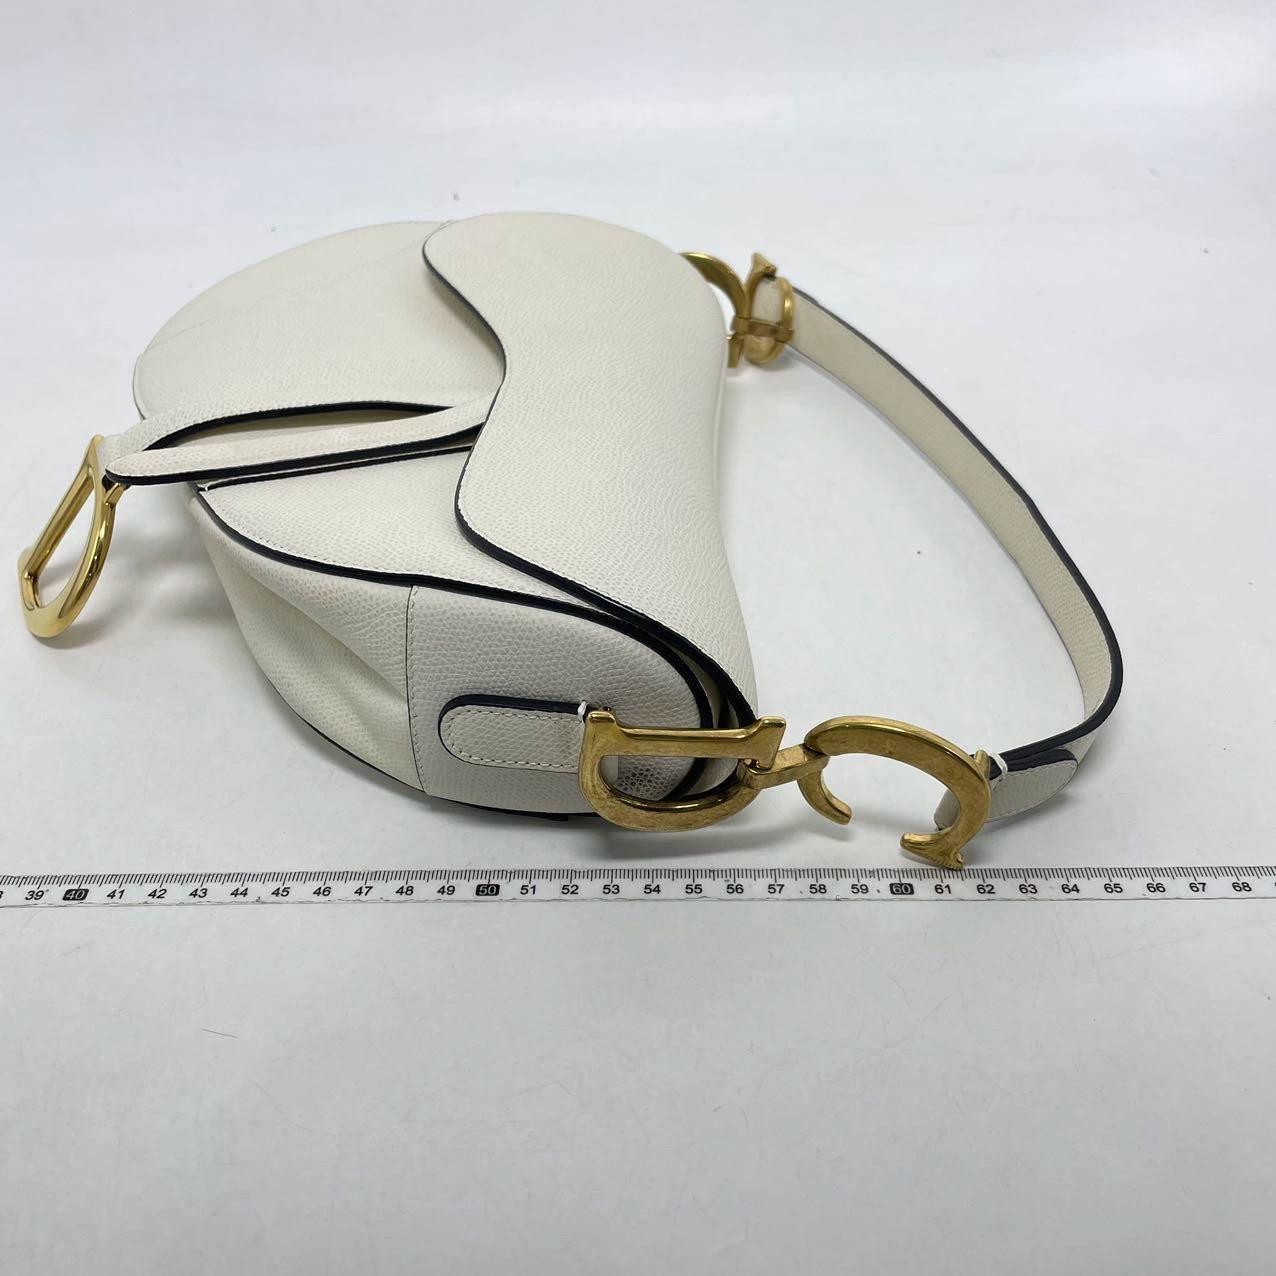 2018 Dior Saddle bag, crafted in white grained calfskin leather, the legendary design comes in size medium, features a magnetic flap, and antique gold-finish CD signature on both sides of the strap. The Saddle bag may be carried by hand worn on the